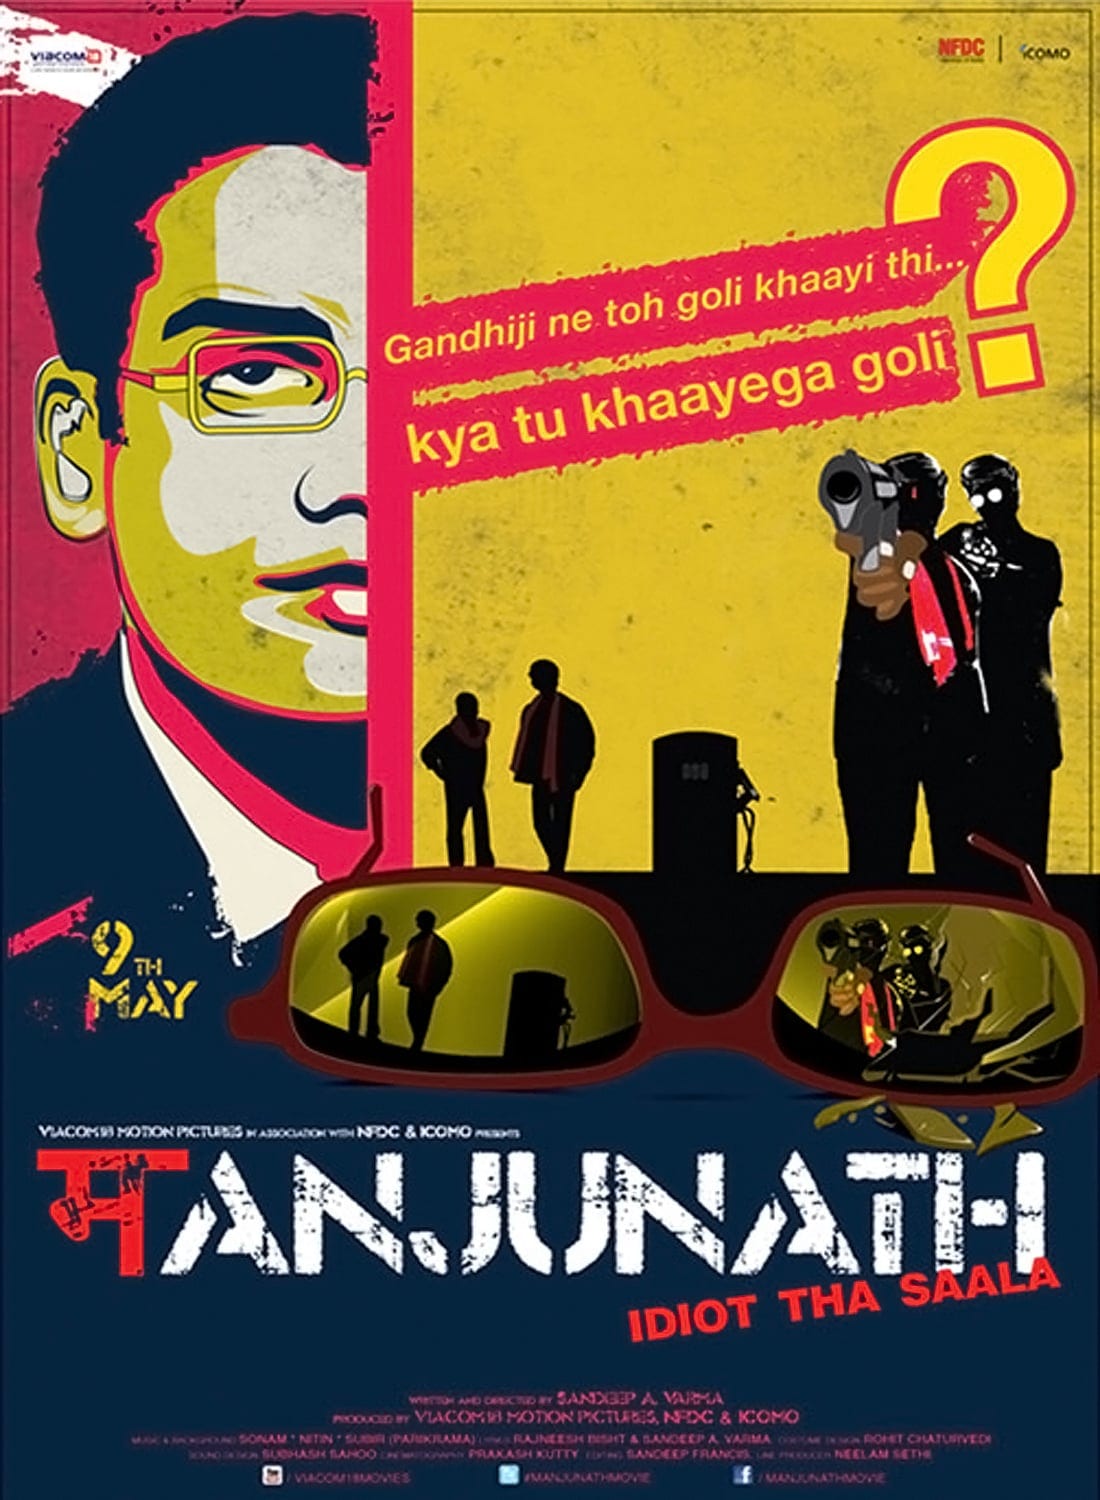 Poster for the movie "Manjunath"